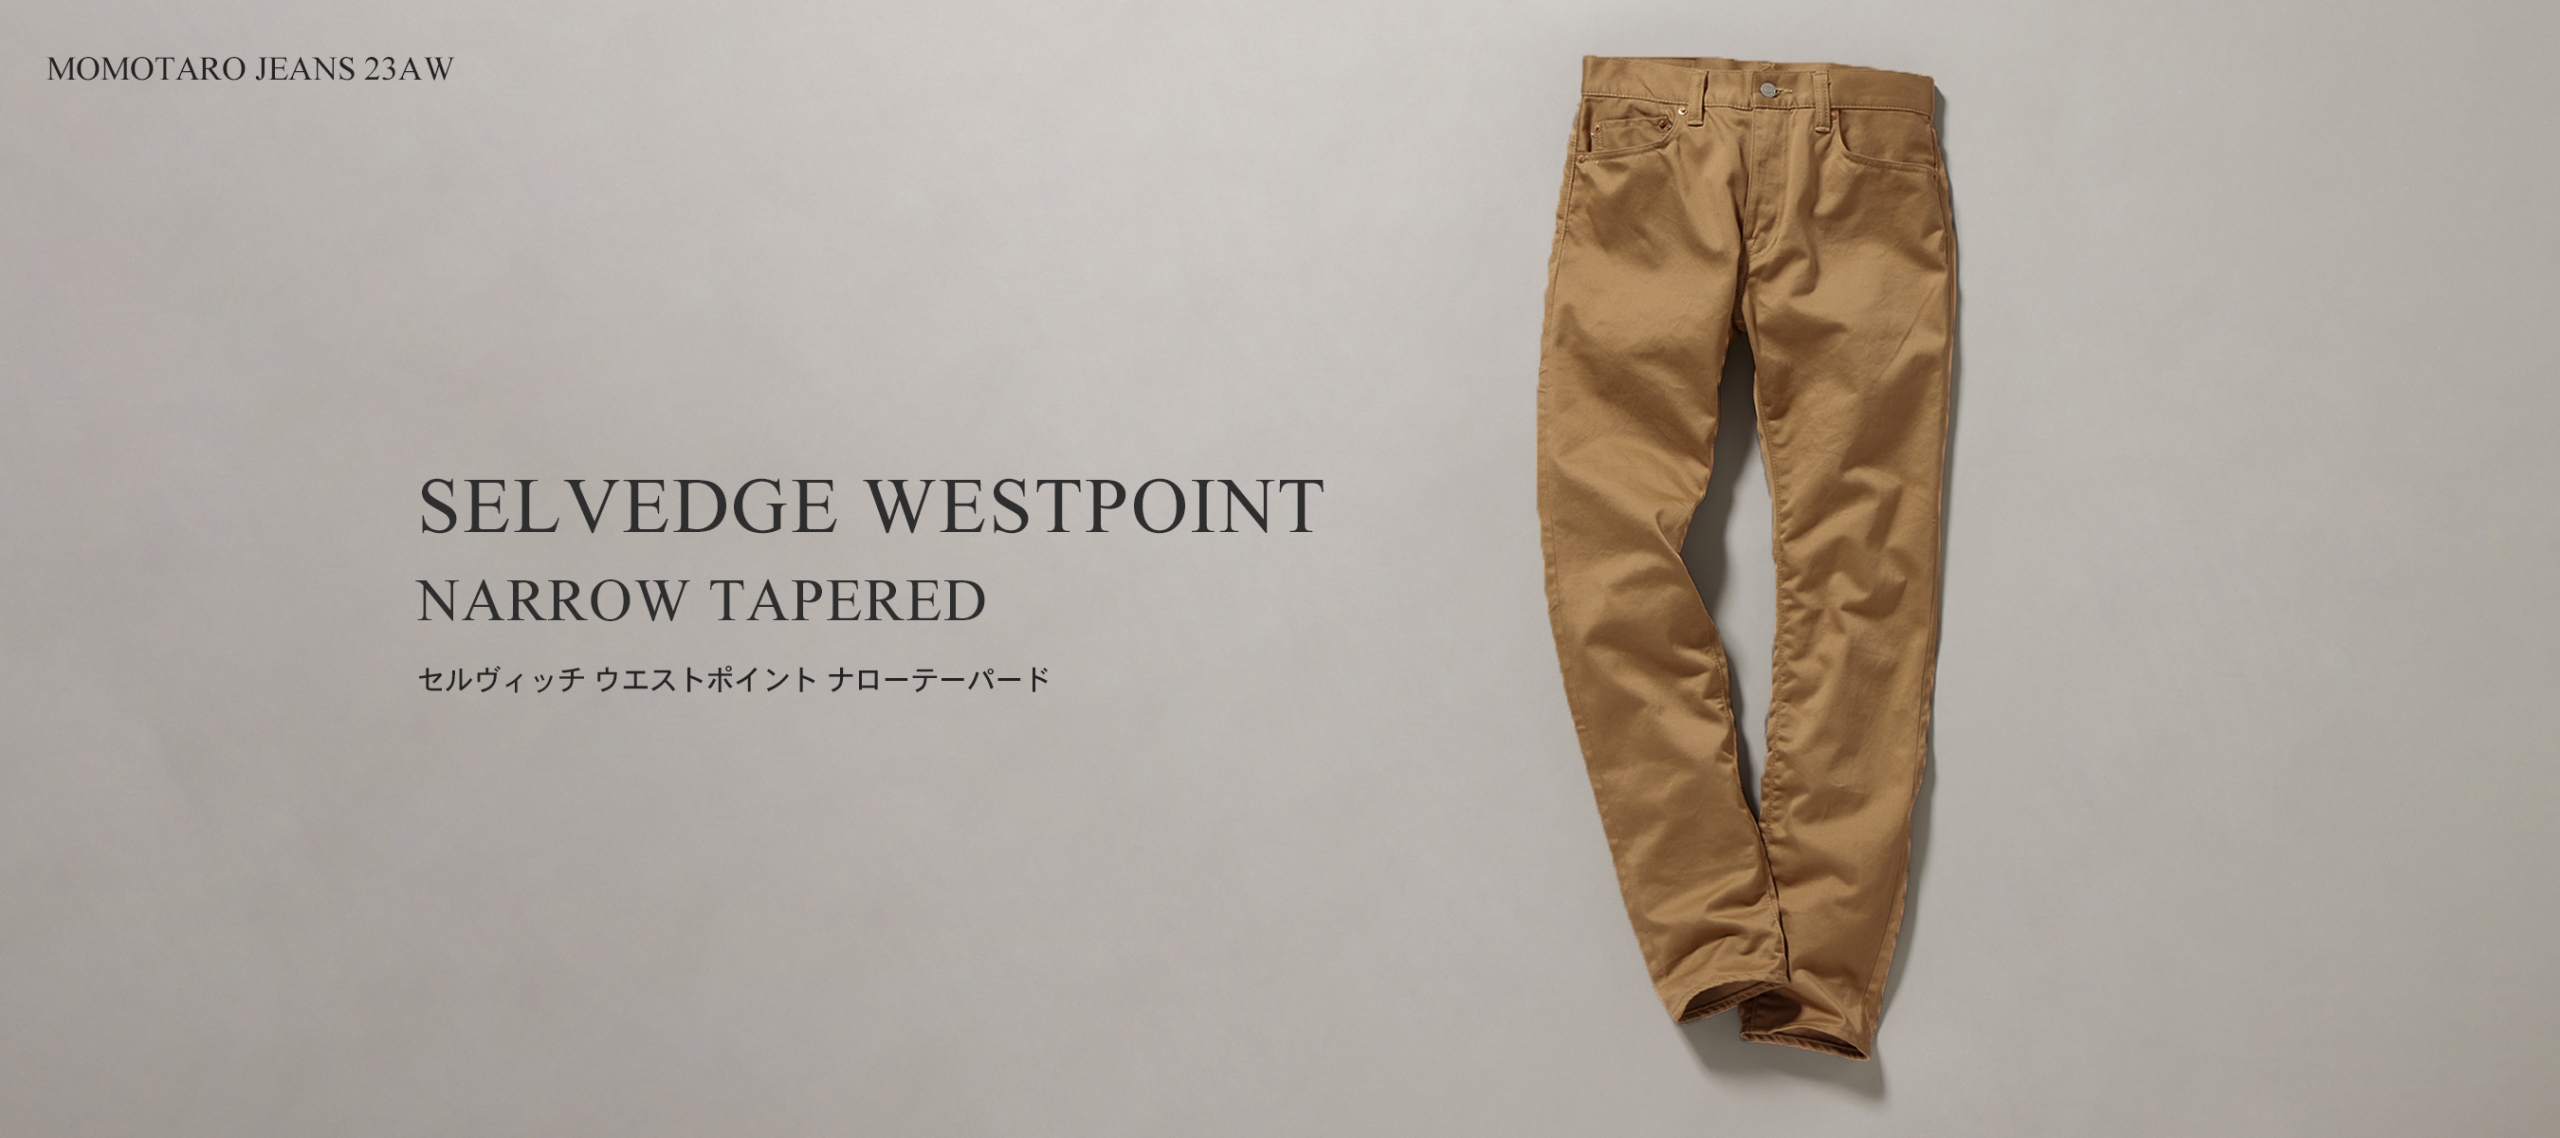 23AW SELVEDGE WESTPOINT NARROW TAPERED